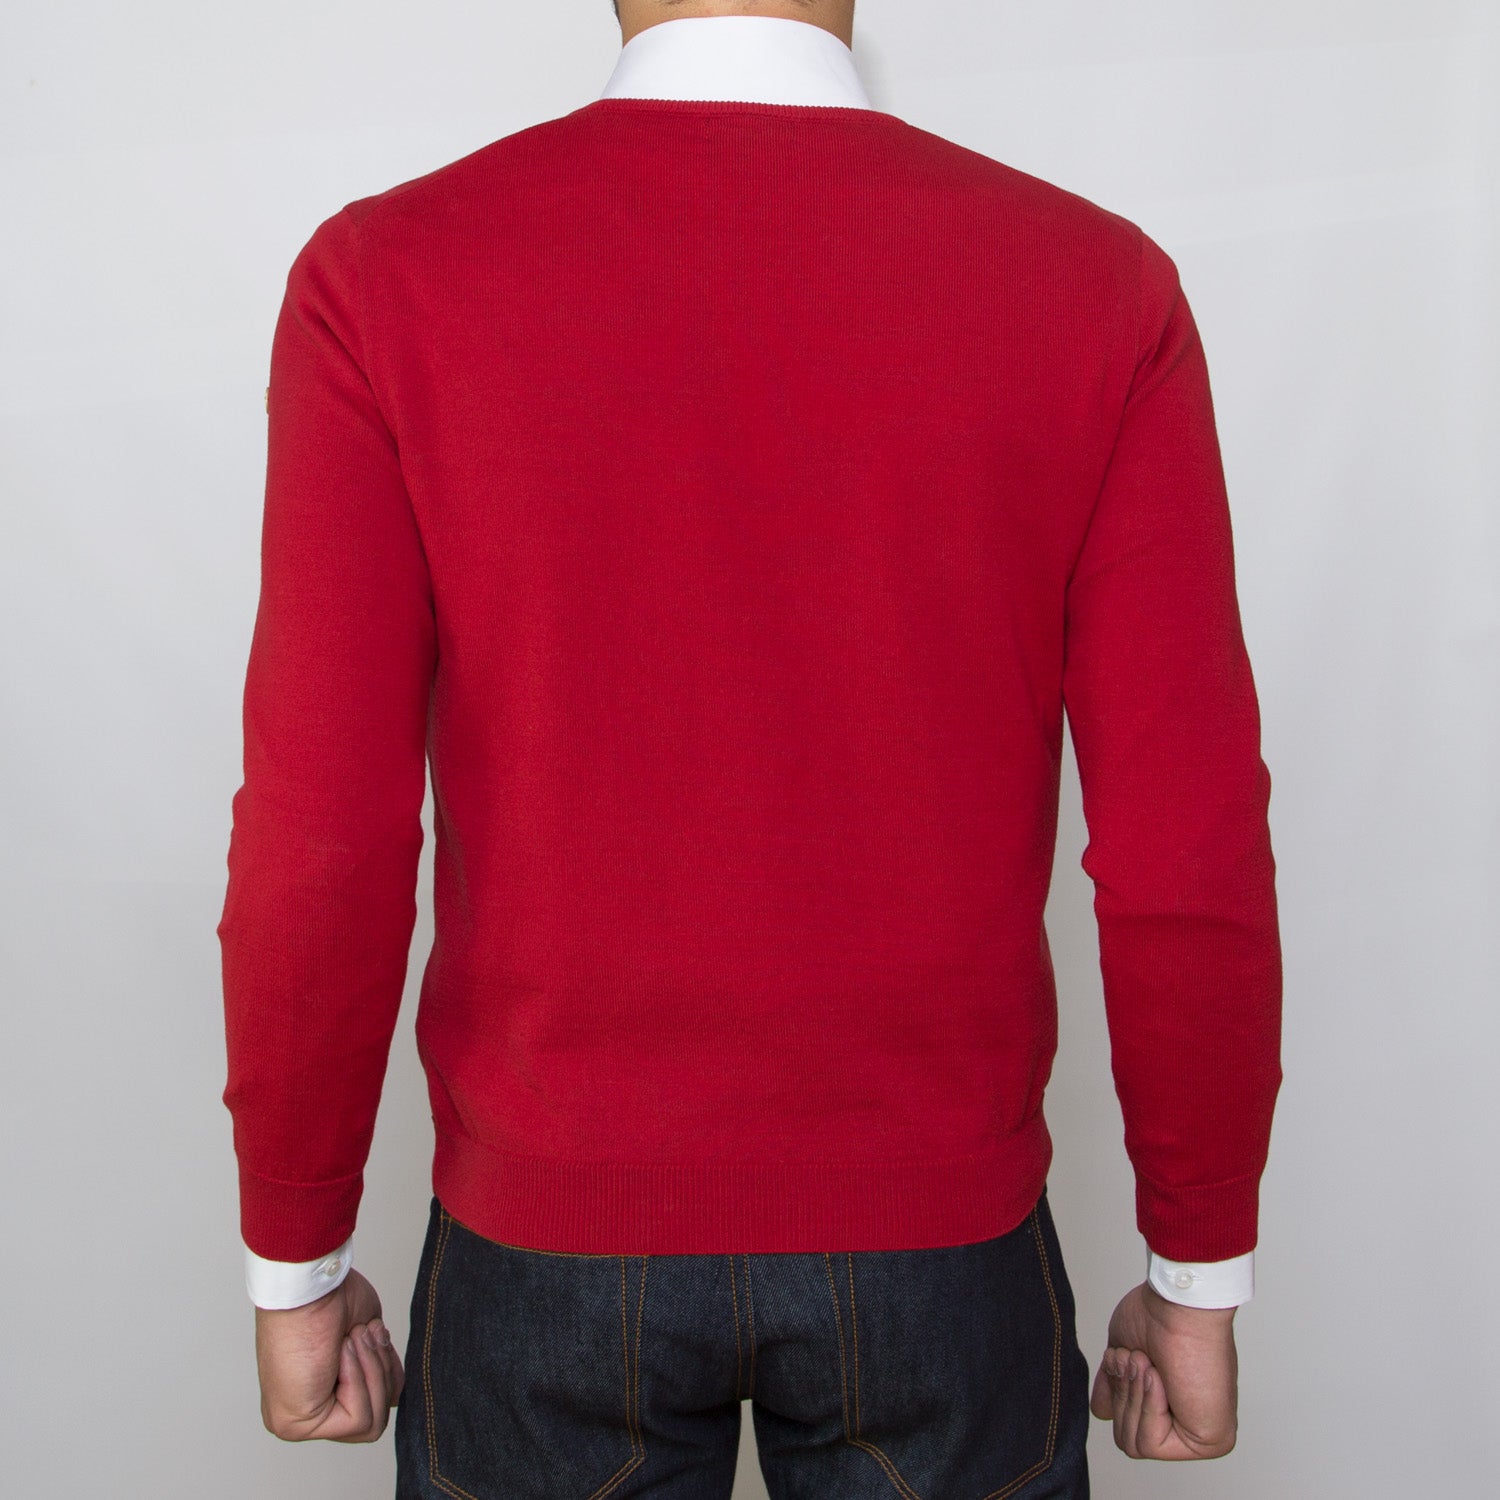 DARIO’S Couture V-Neck Sweater Köln 100% African Cotton in Red